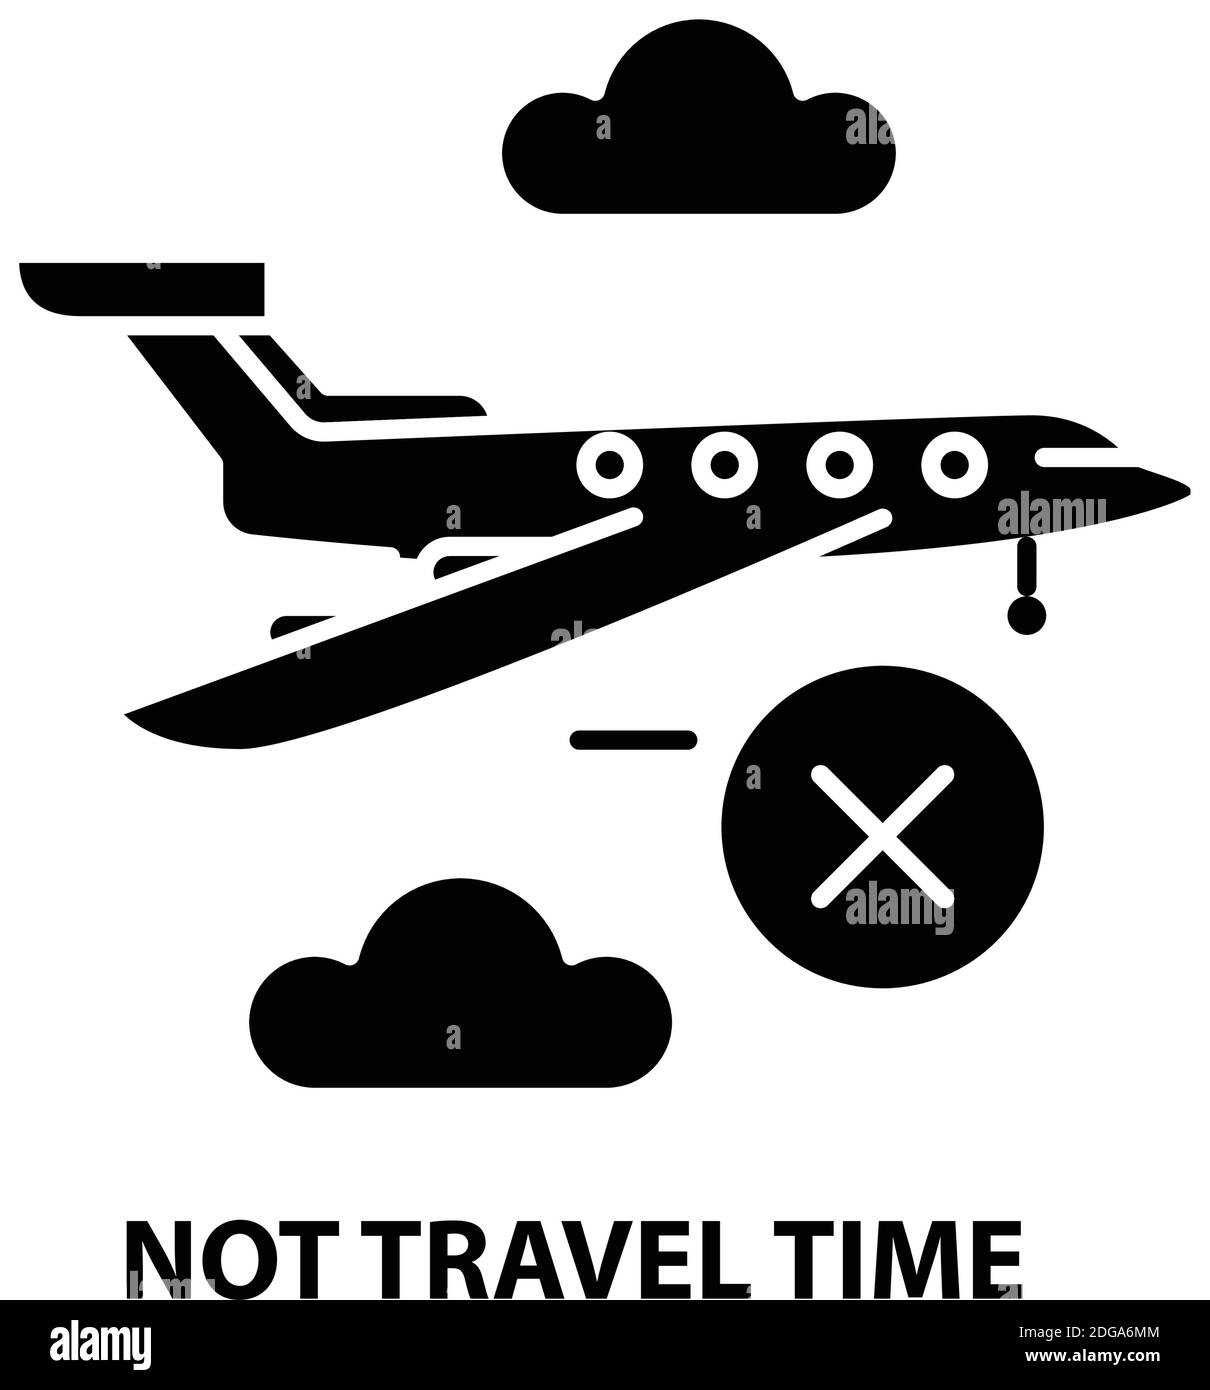 not travel time icon, black vector sign with editable strokes, concept illustration Stock Vector